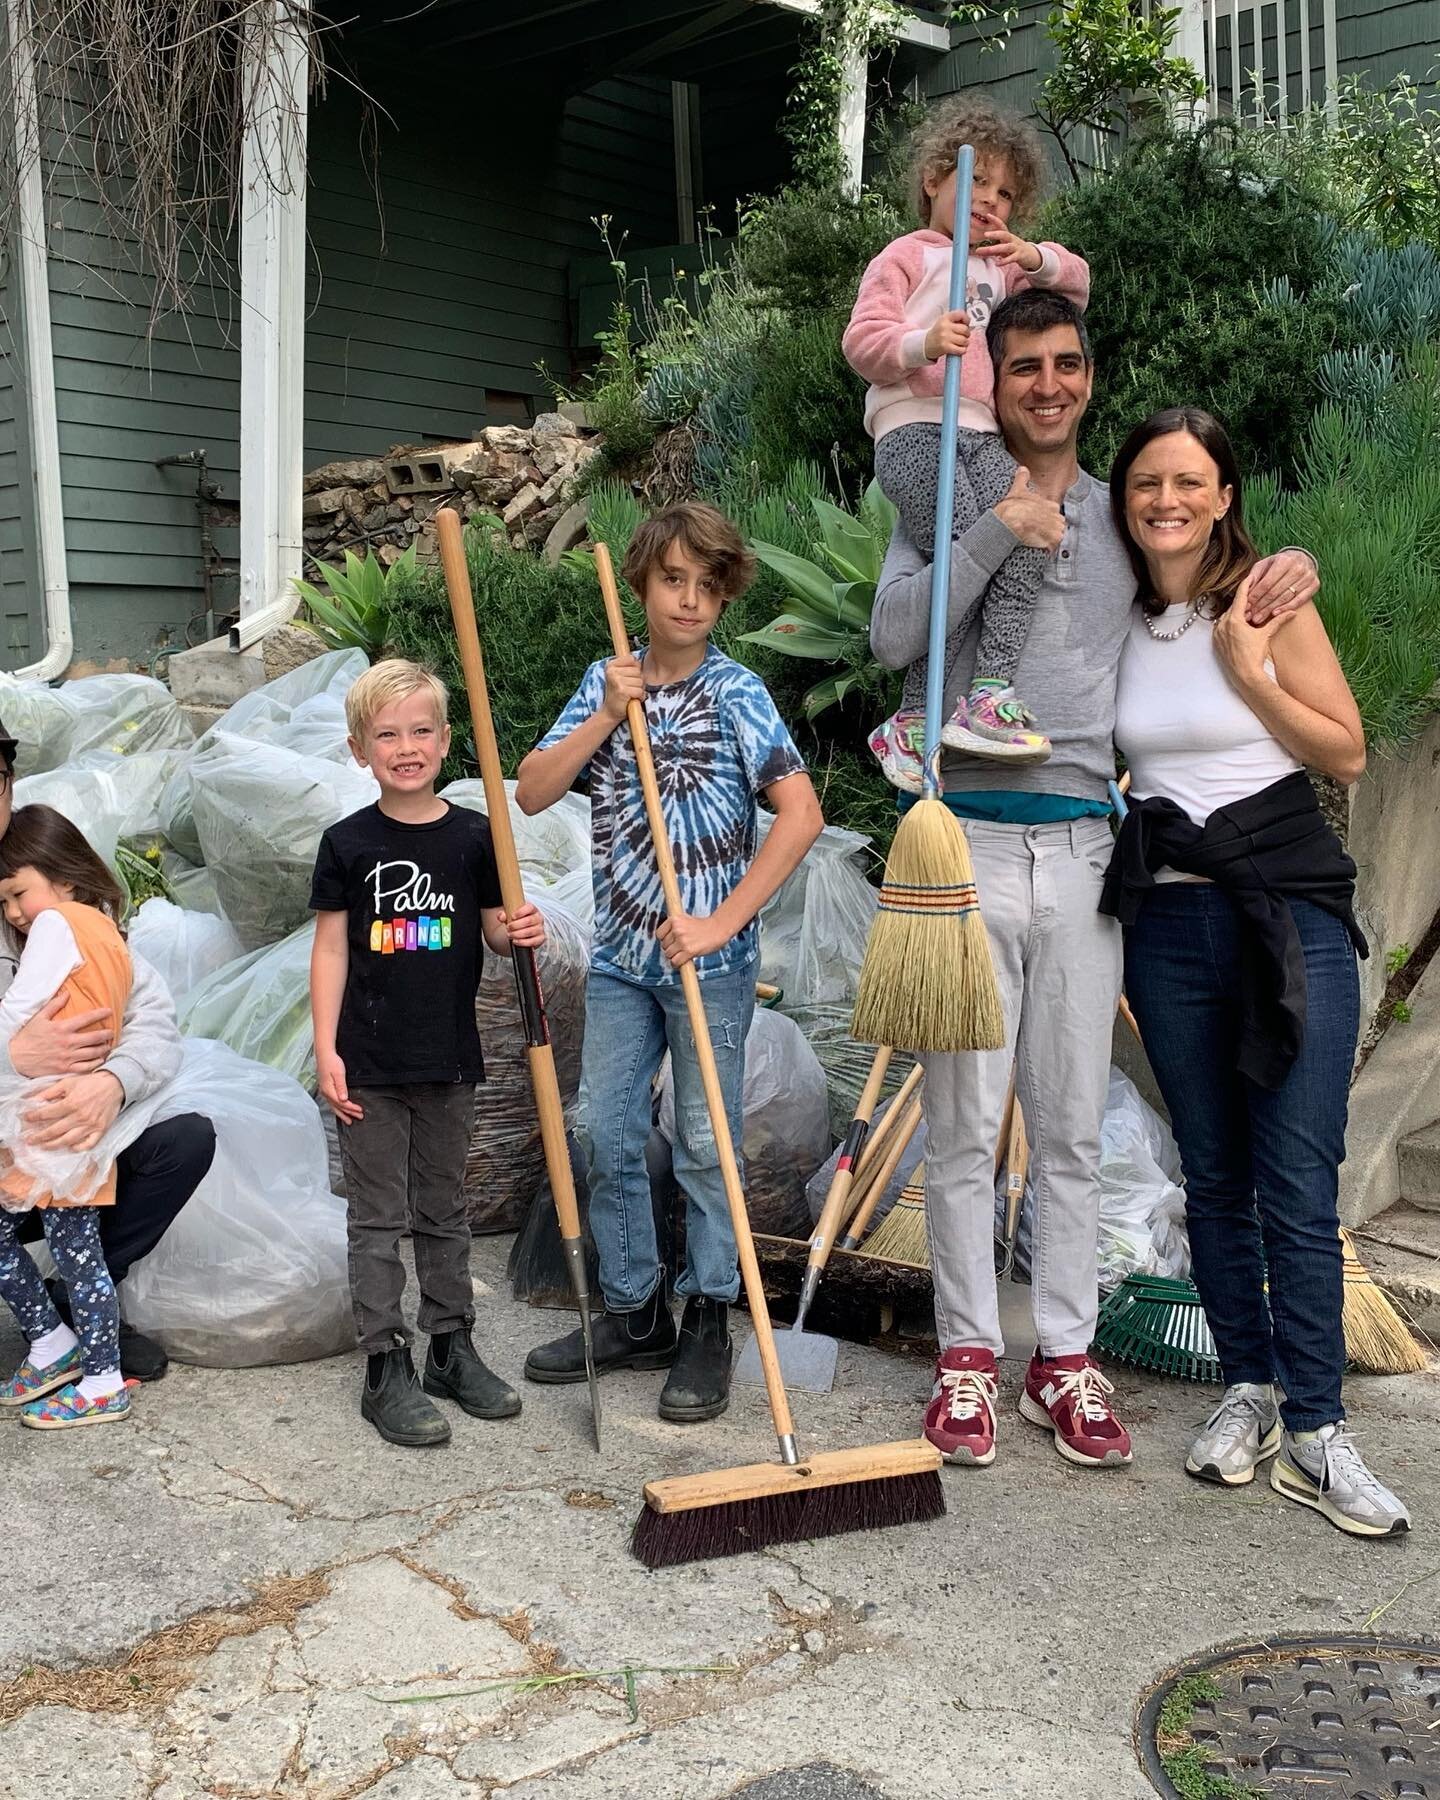 Another successful stair cleanup! Thanks to all the neighbors who came out to help. #fhra #communityfirst #franklinhills #losfeliz #neighborhoodcleanup